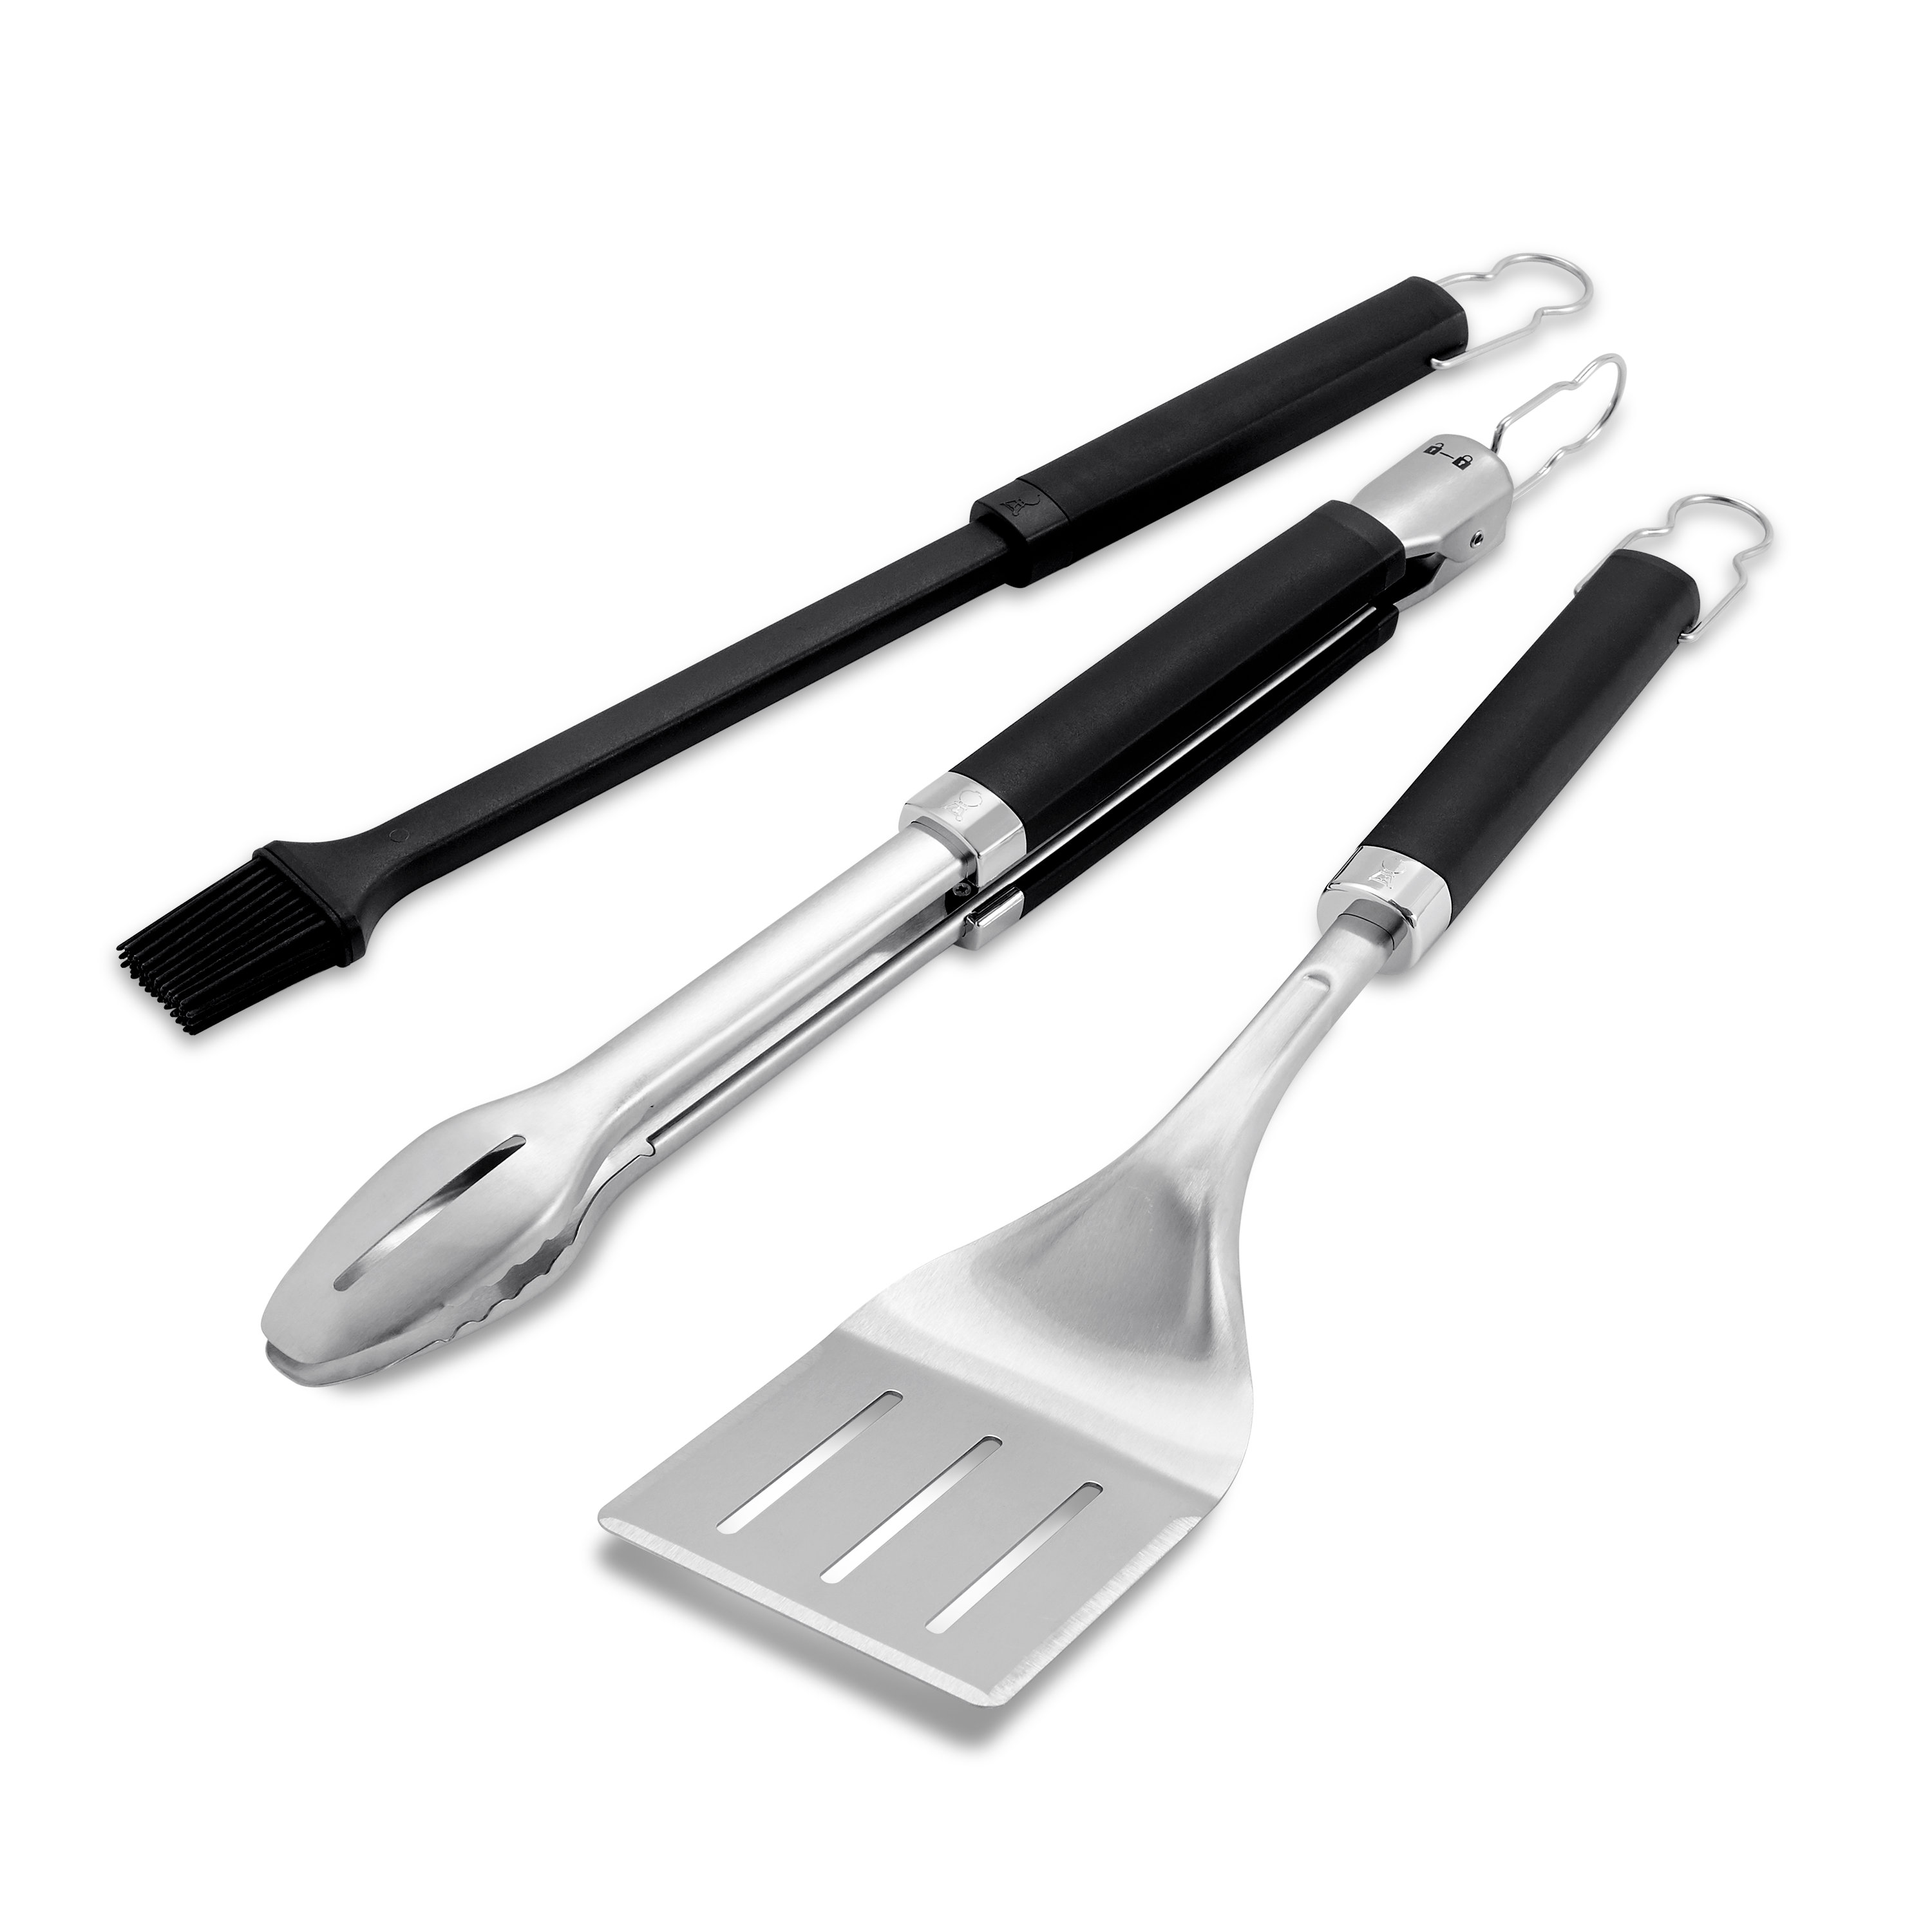 Performore Heavy Duty Silicone Food Basting Brush and Tongs Kitchen Set (4 in 1 Set)